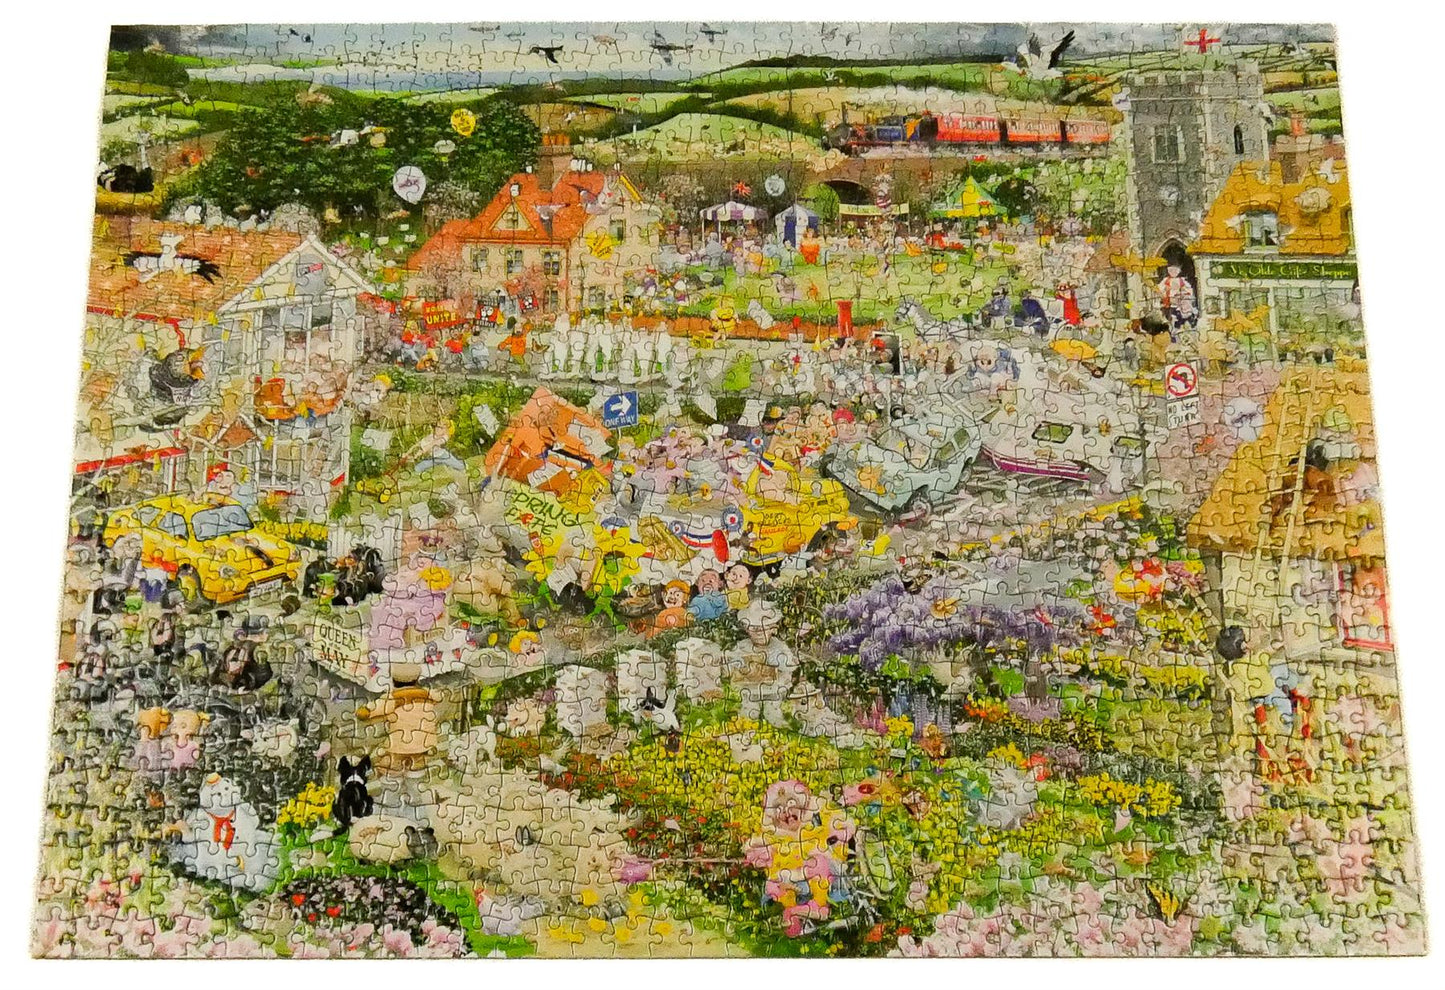 Mike Jupp I Love Spring Too 1000 Piece Jigsaw Puzzle